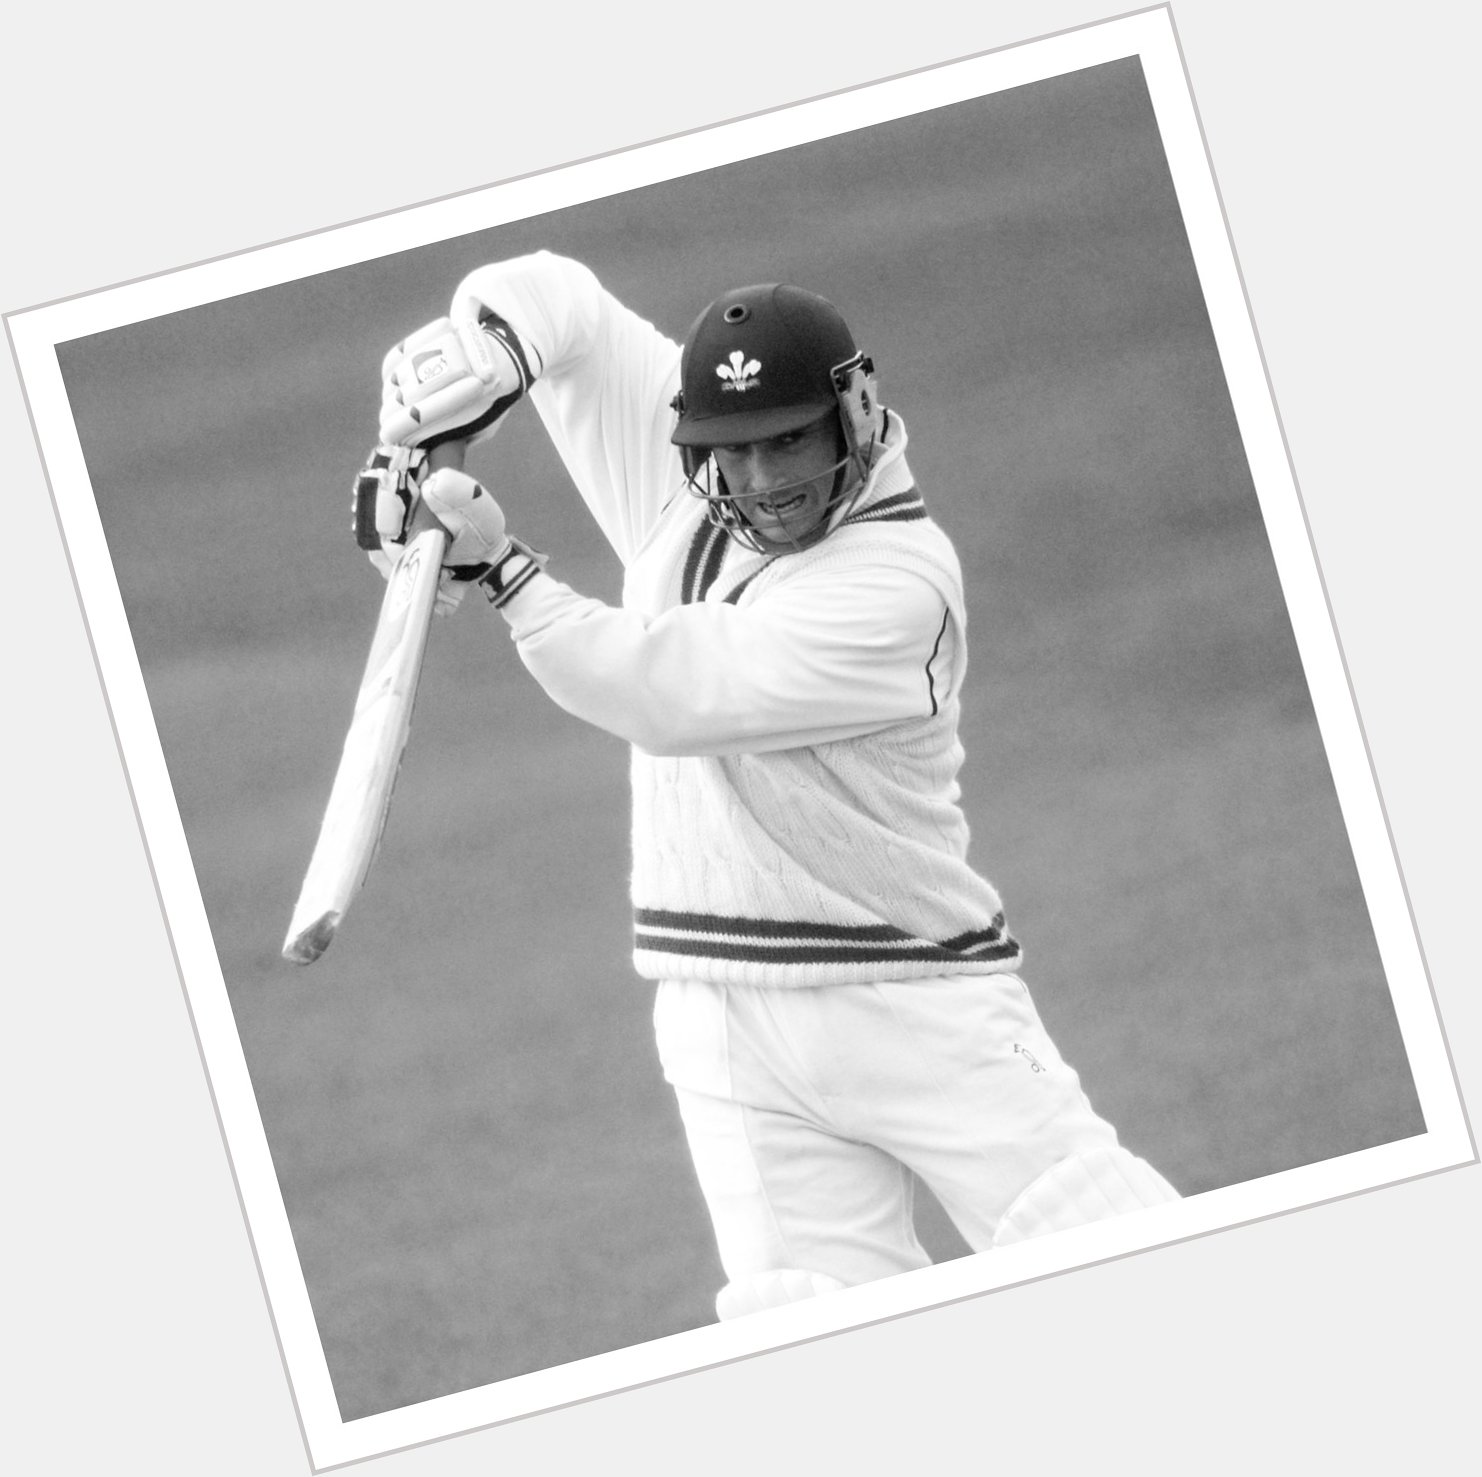 What a cricketer this guy was! Happy 48th Birthday Graham Thorpe.  